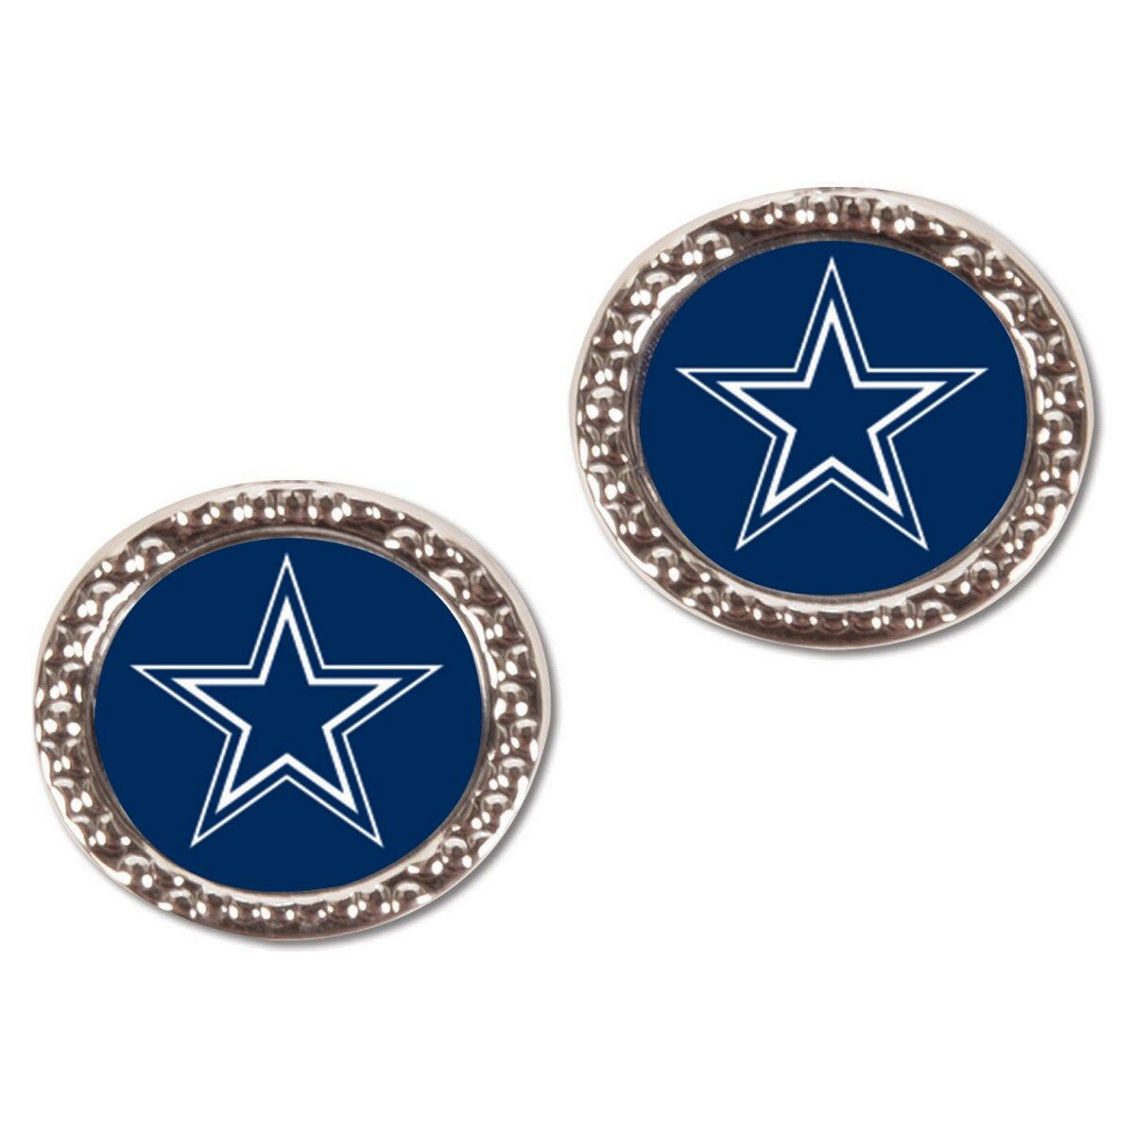 WinCraft Women's Dallas Cowboys Round Earrings - Image 2 of 3